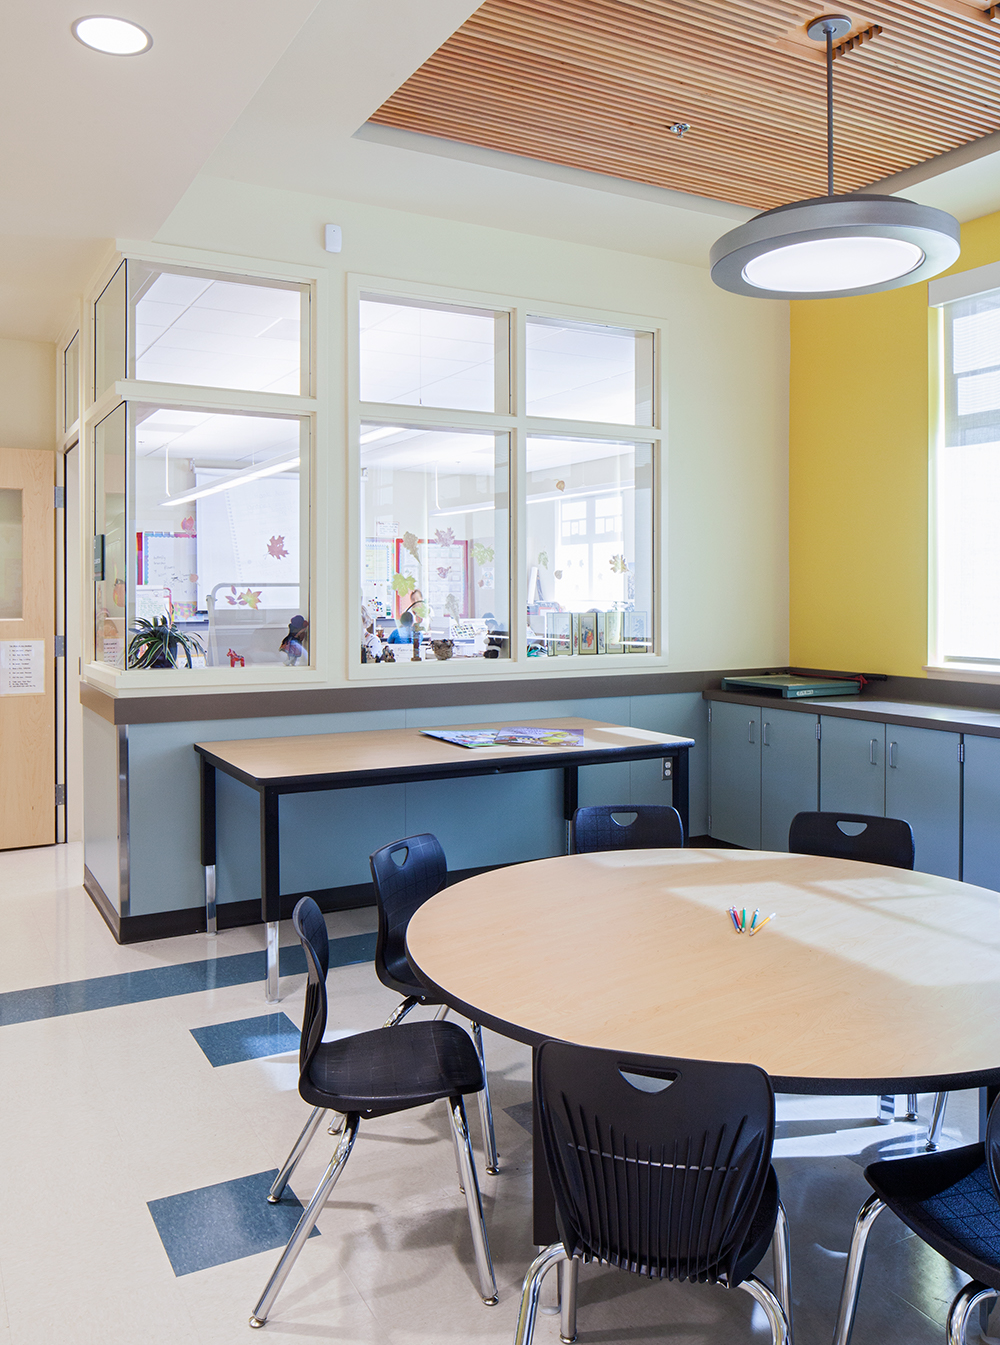 Broadway pendants in an education lighting design, seen here above a classroom table.